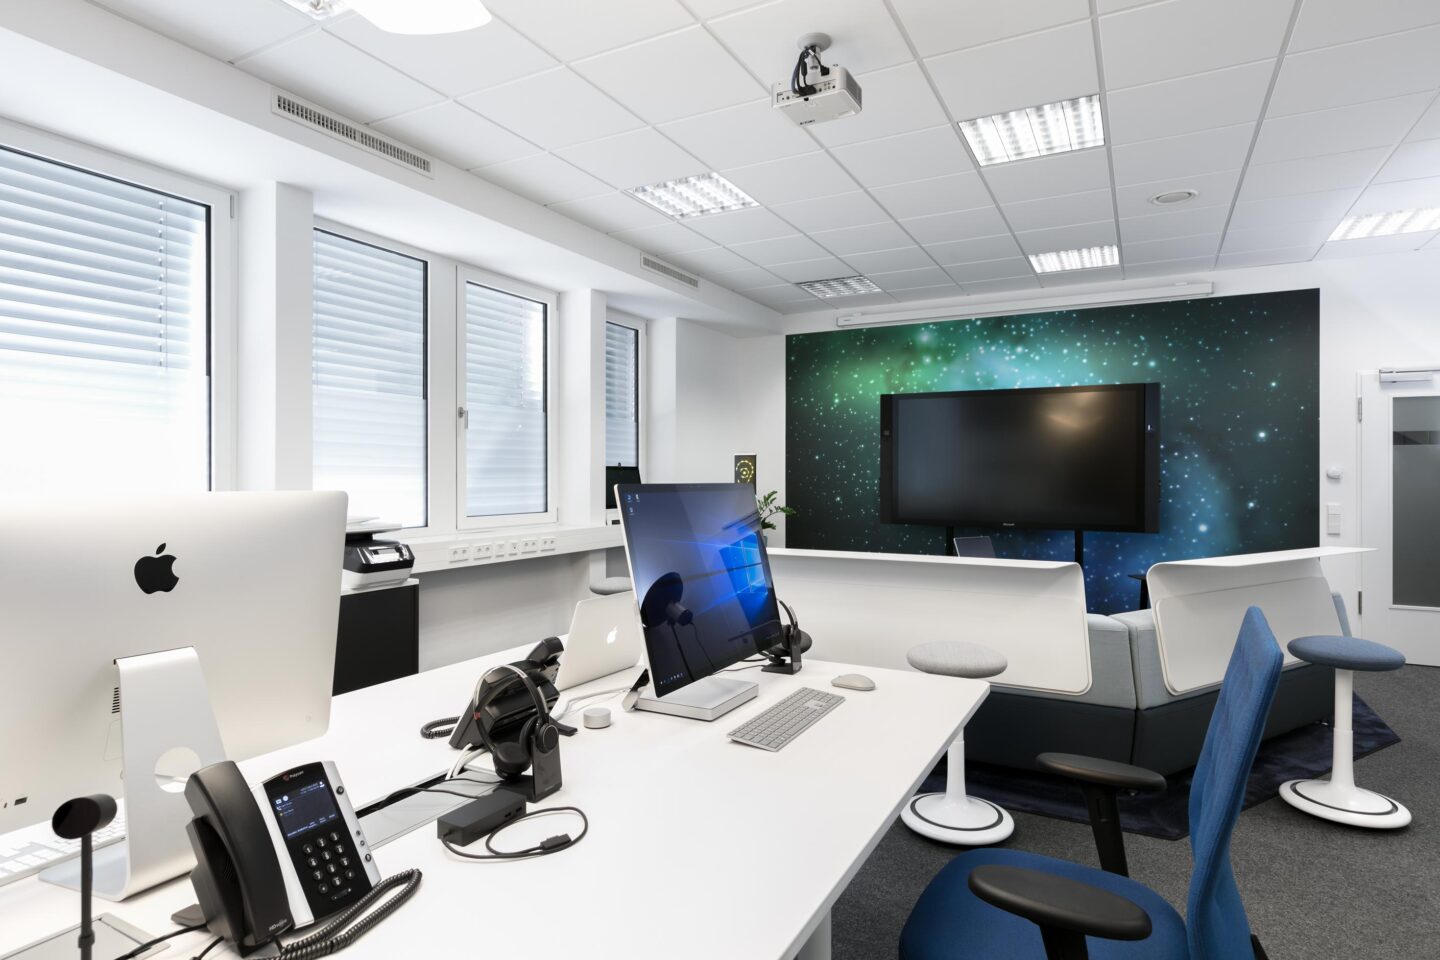 Bechtle AG Karlsruhe │ modern working environment │ furnished with ophelis, Cor, Steelcase, Vitra and Ongo by feco